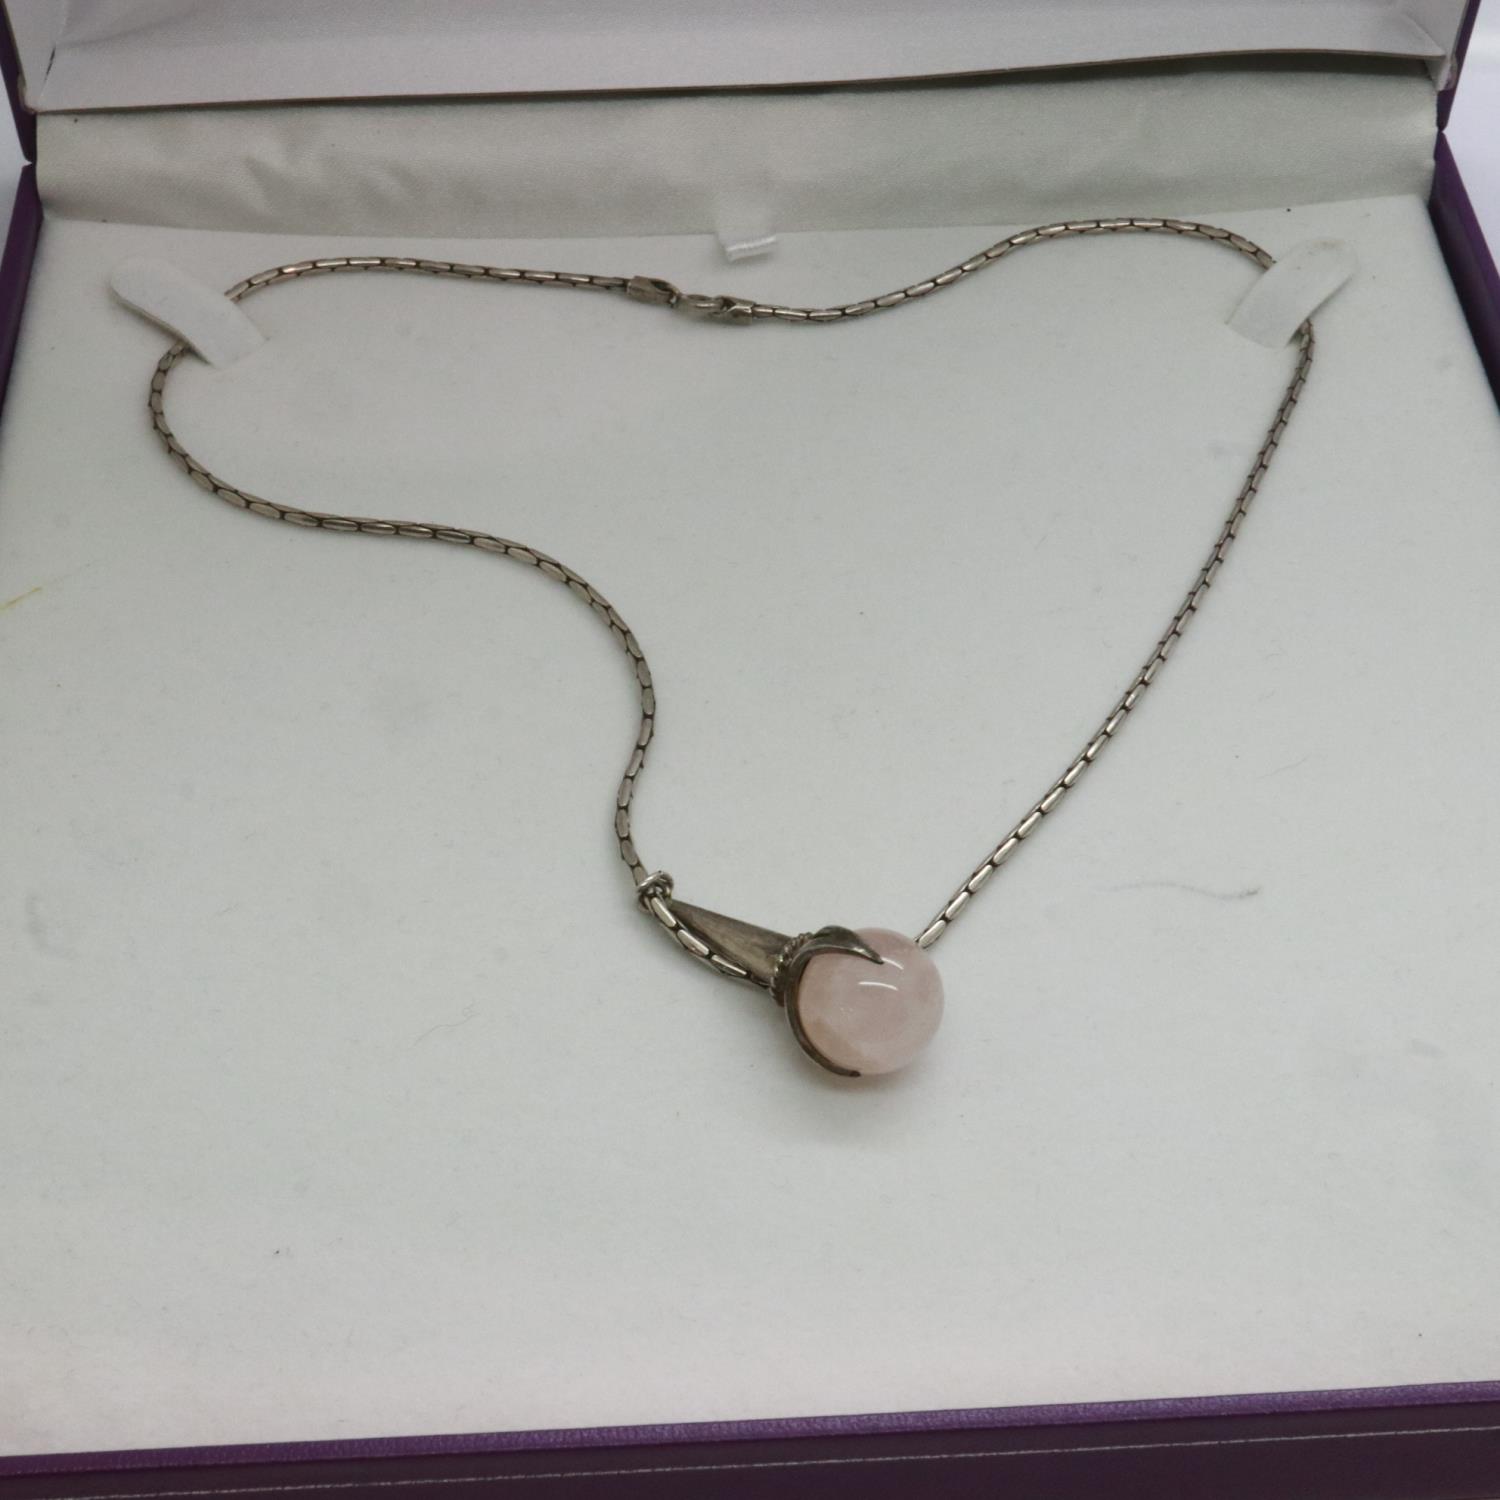 Silver pendant necklace with rose quartz in a claw setting, L: 40 cm, boxed. UK P&P Group 1 (£16+VAT